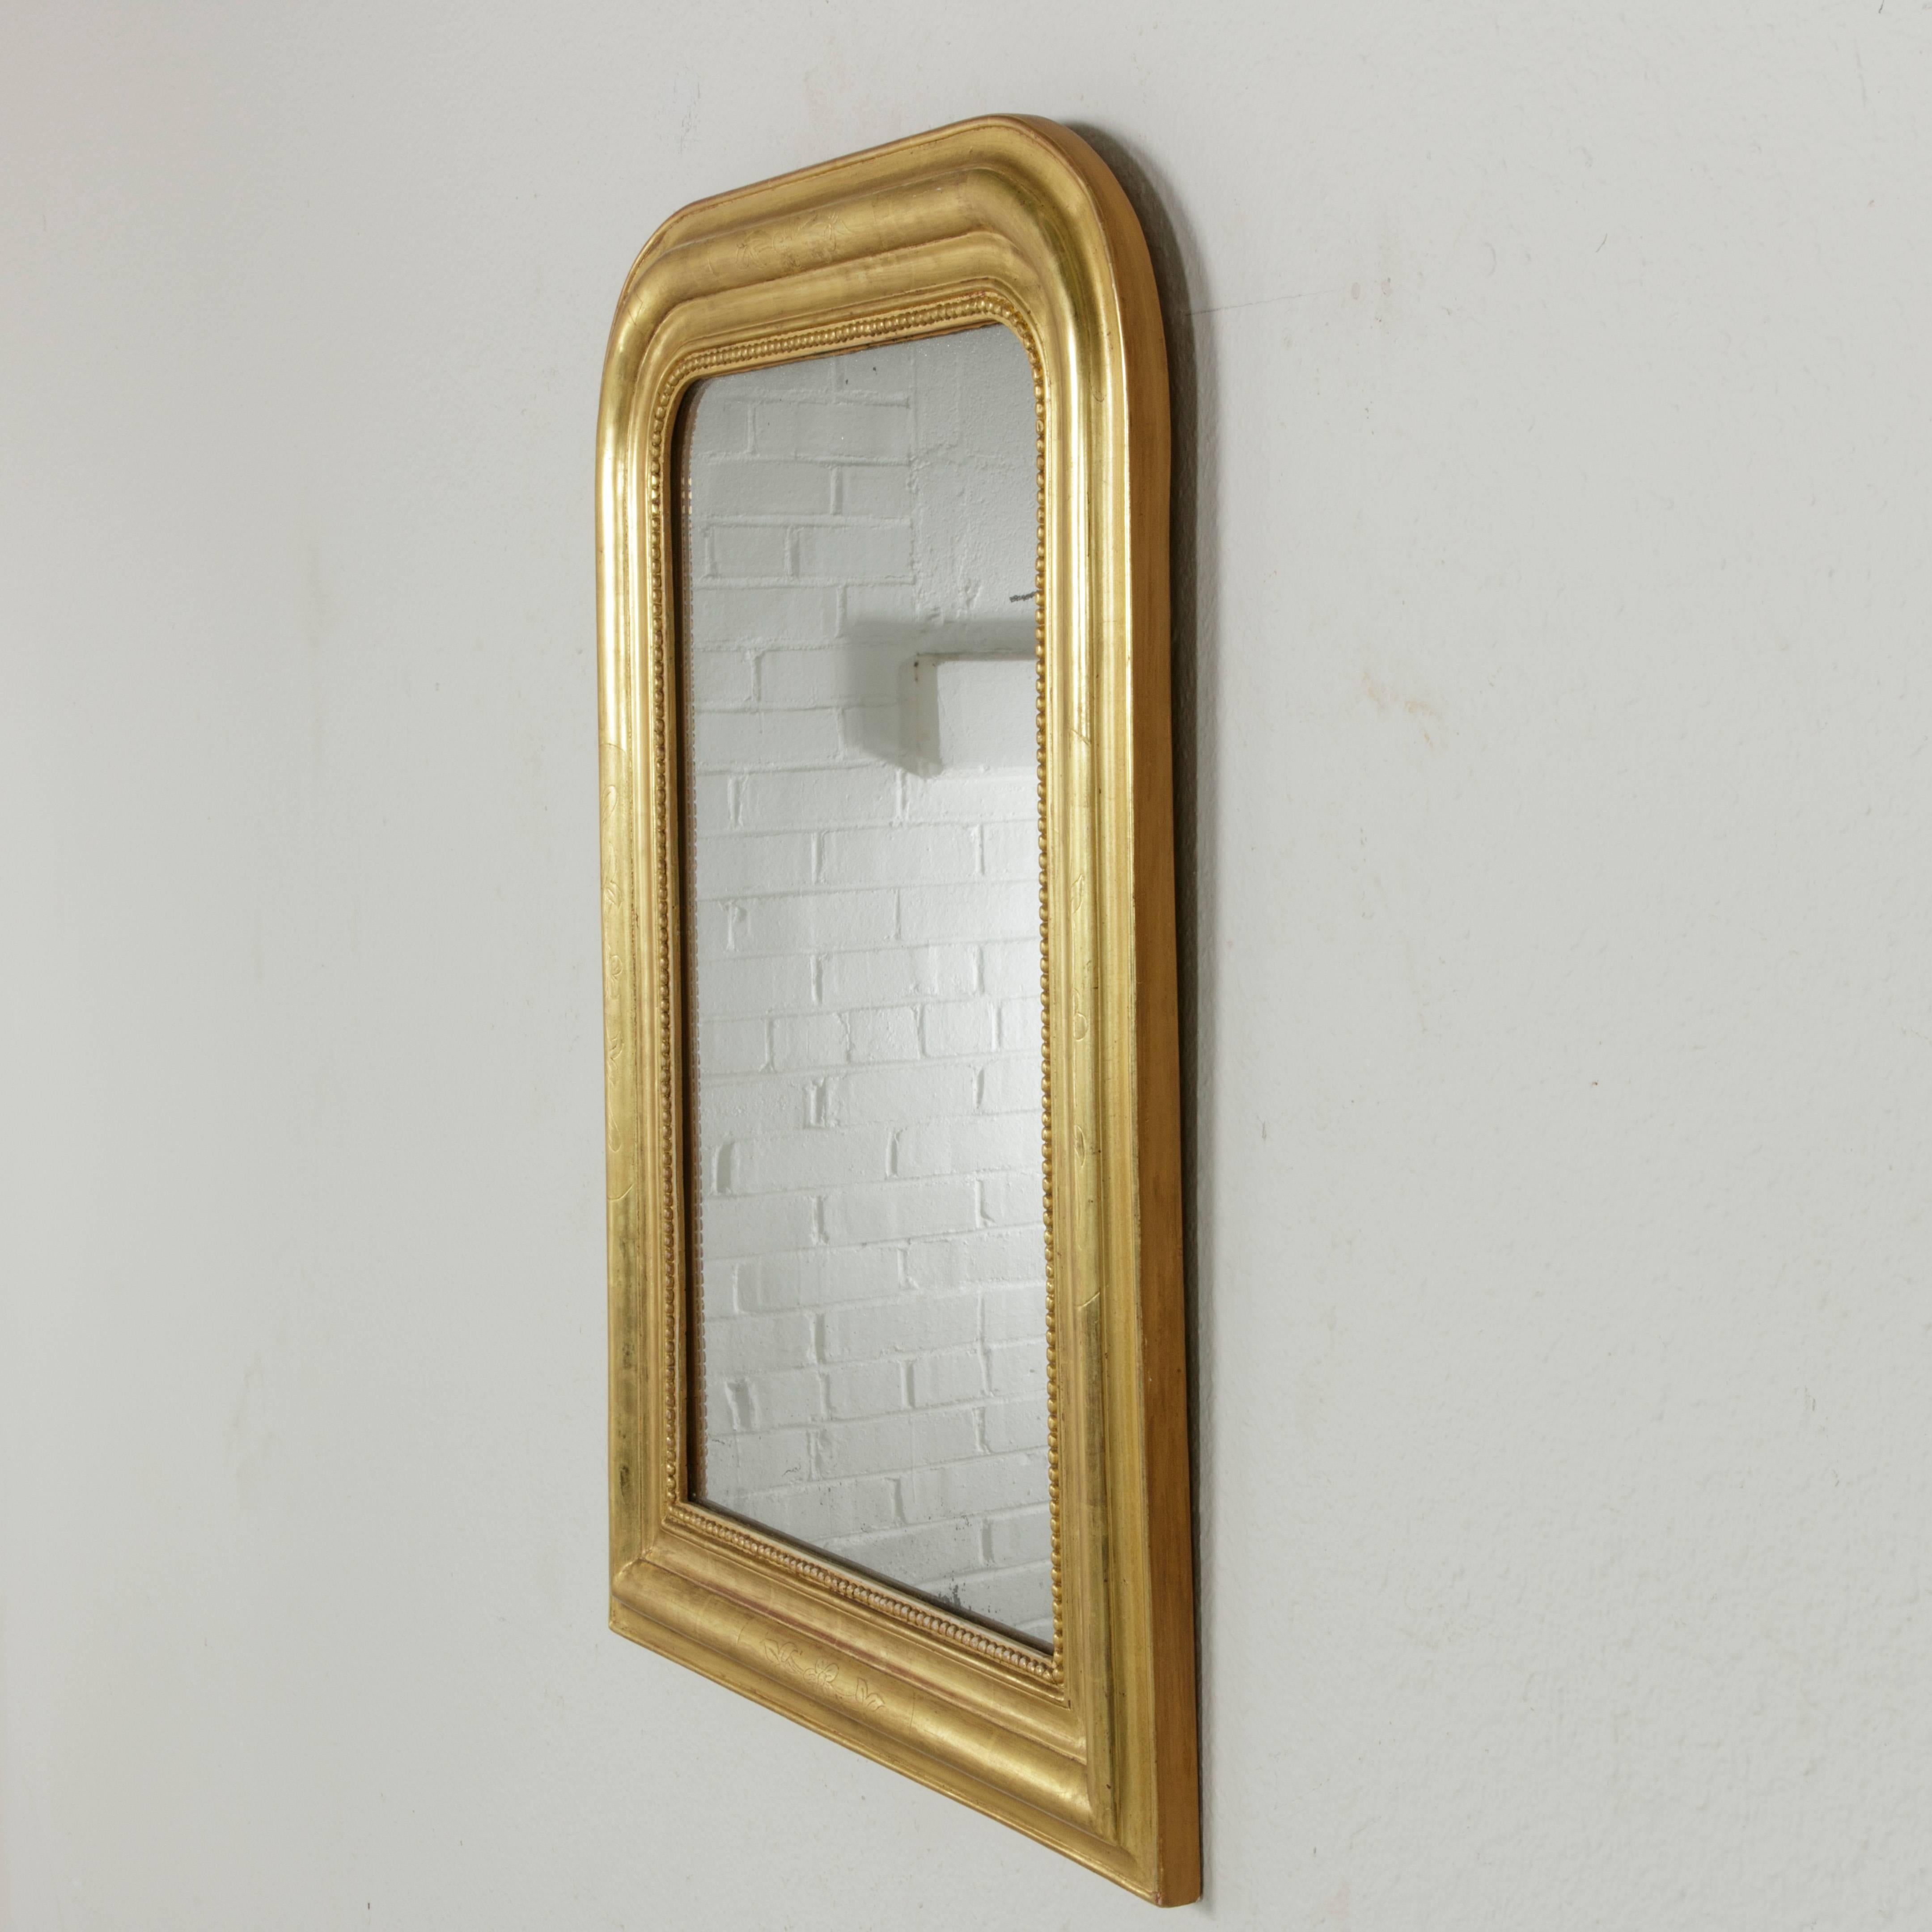 This small-scale 19th century Louis Philippe mirror with its flawless gilding and original mercury glass is an exquisite jewel. The giltwood frame features an inner border of fine beading and the pillow frame is detailed with subtle incising of